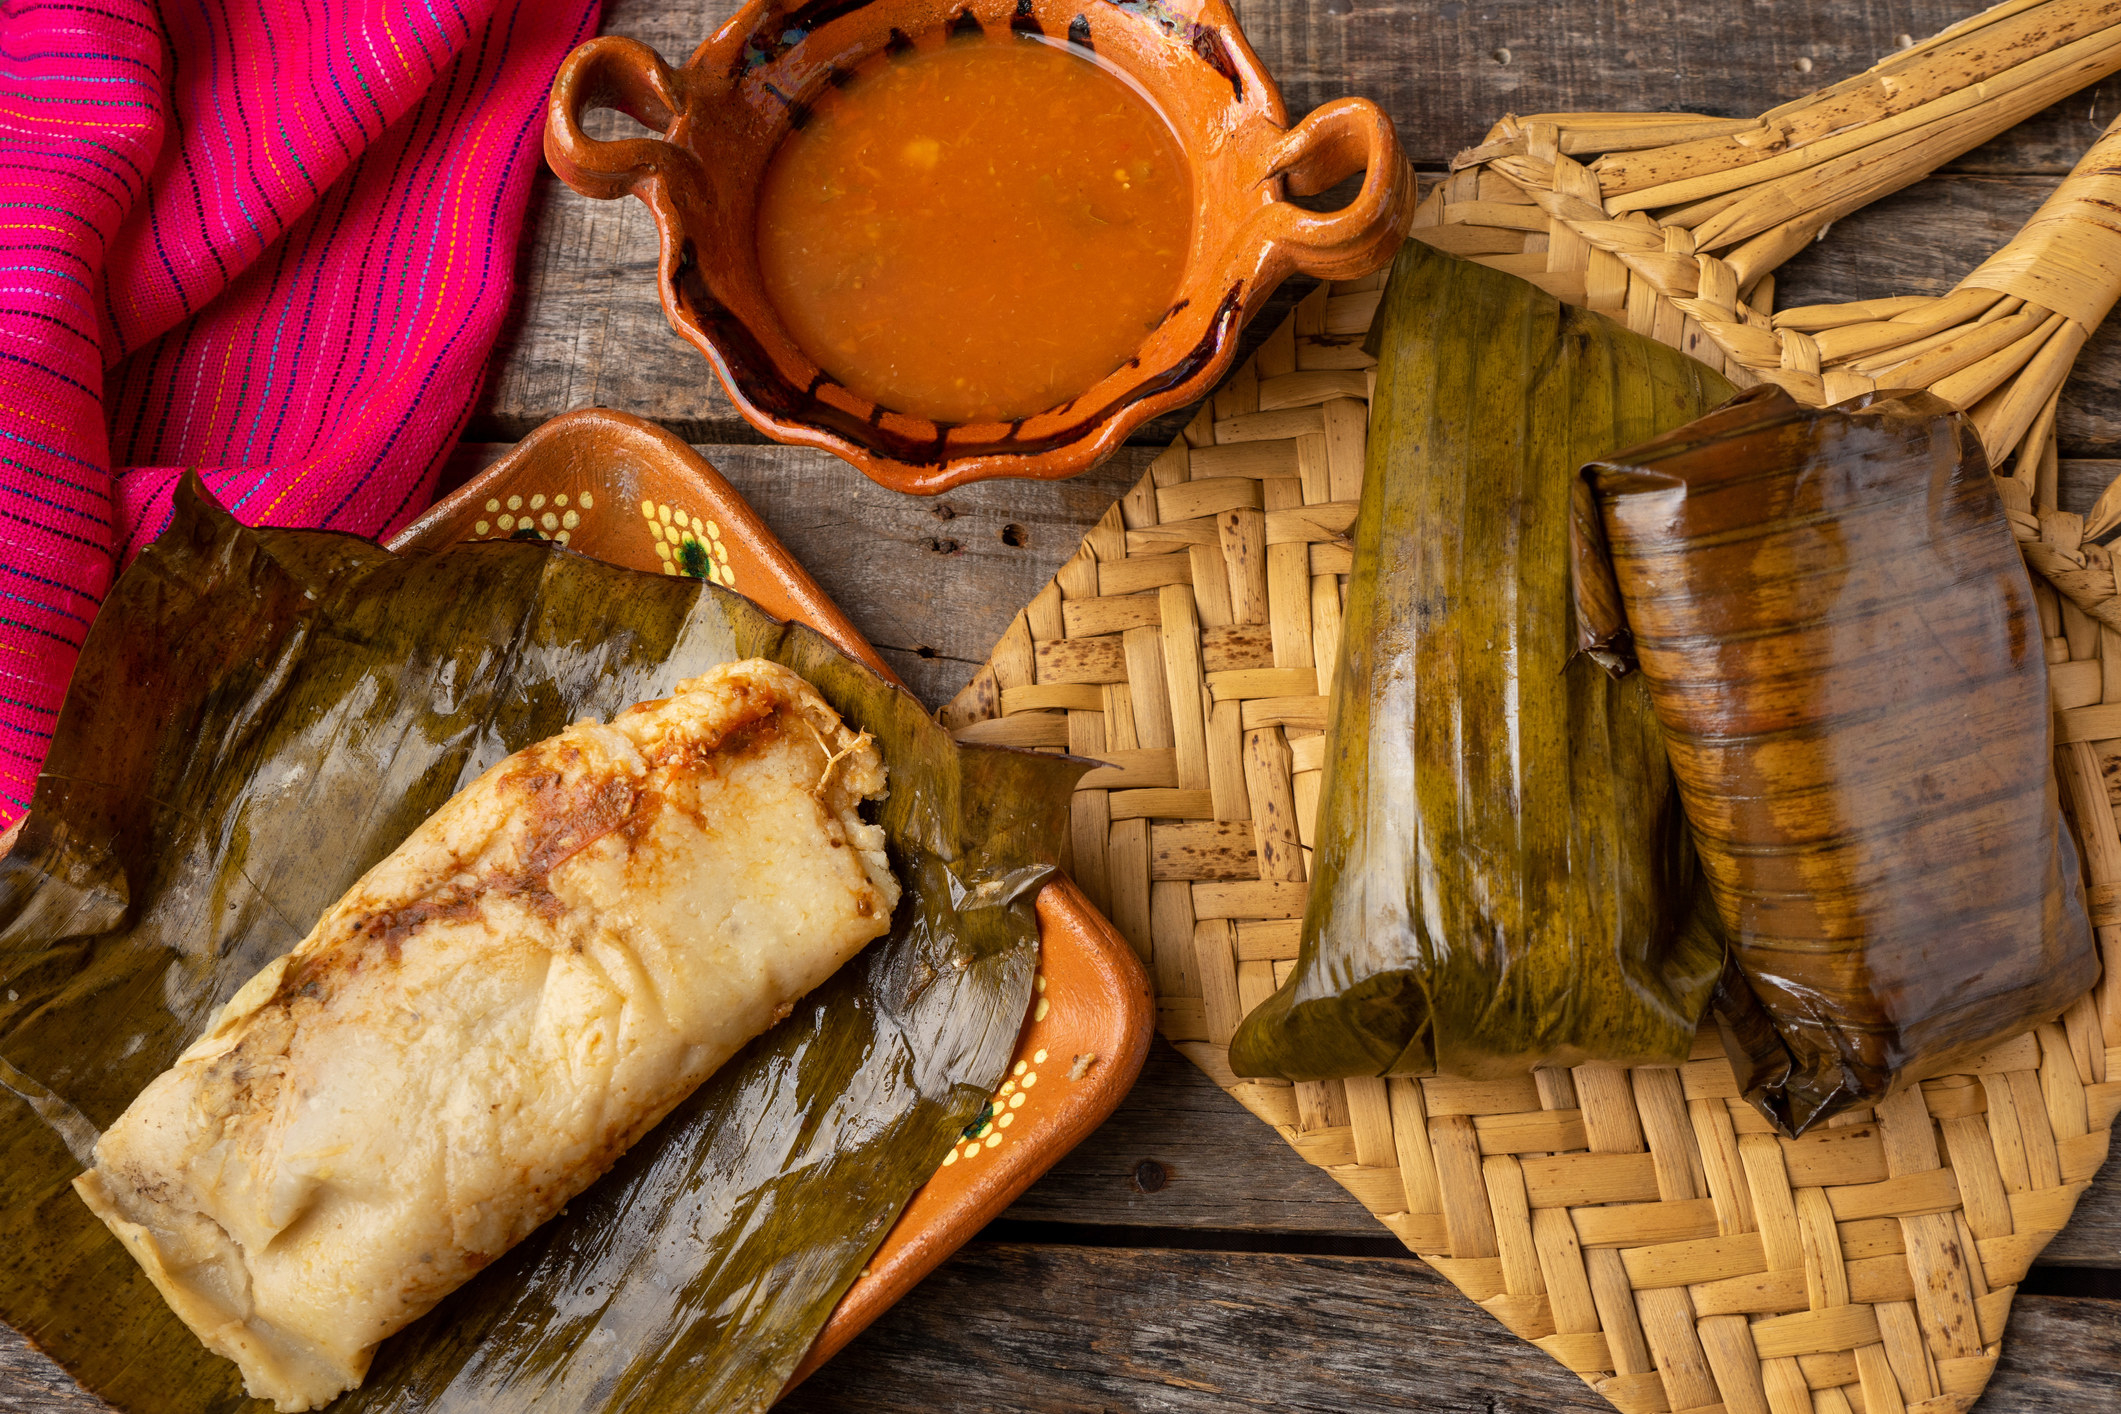 tamales wrapped in banana leaves